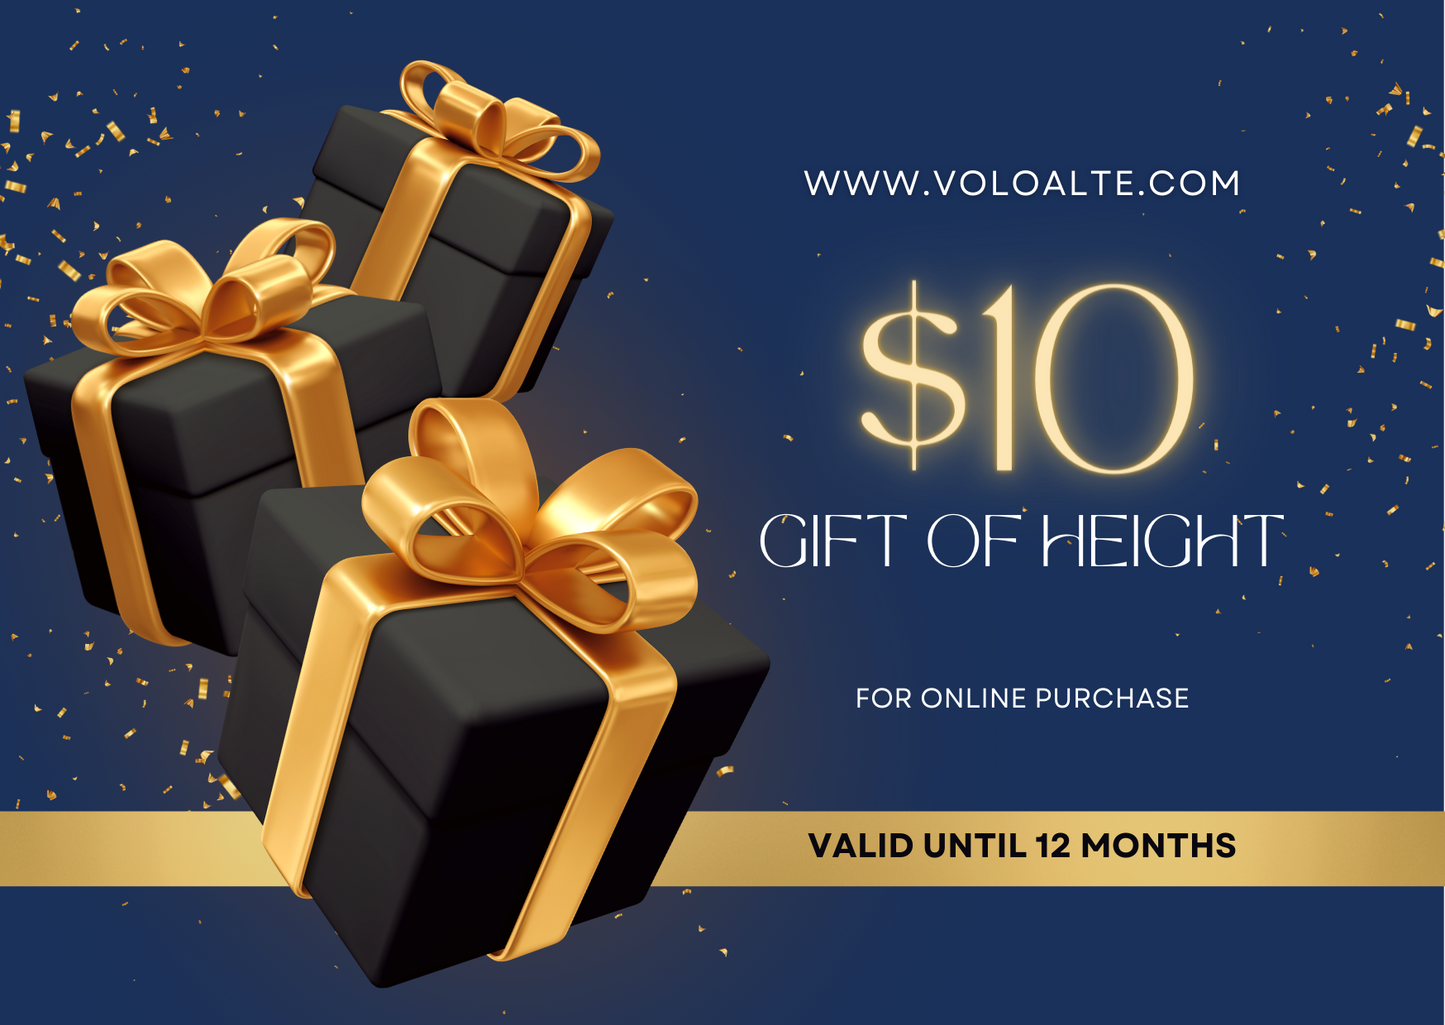 Volo Alte Shoes - Gift Card